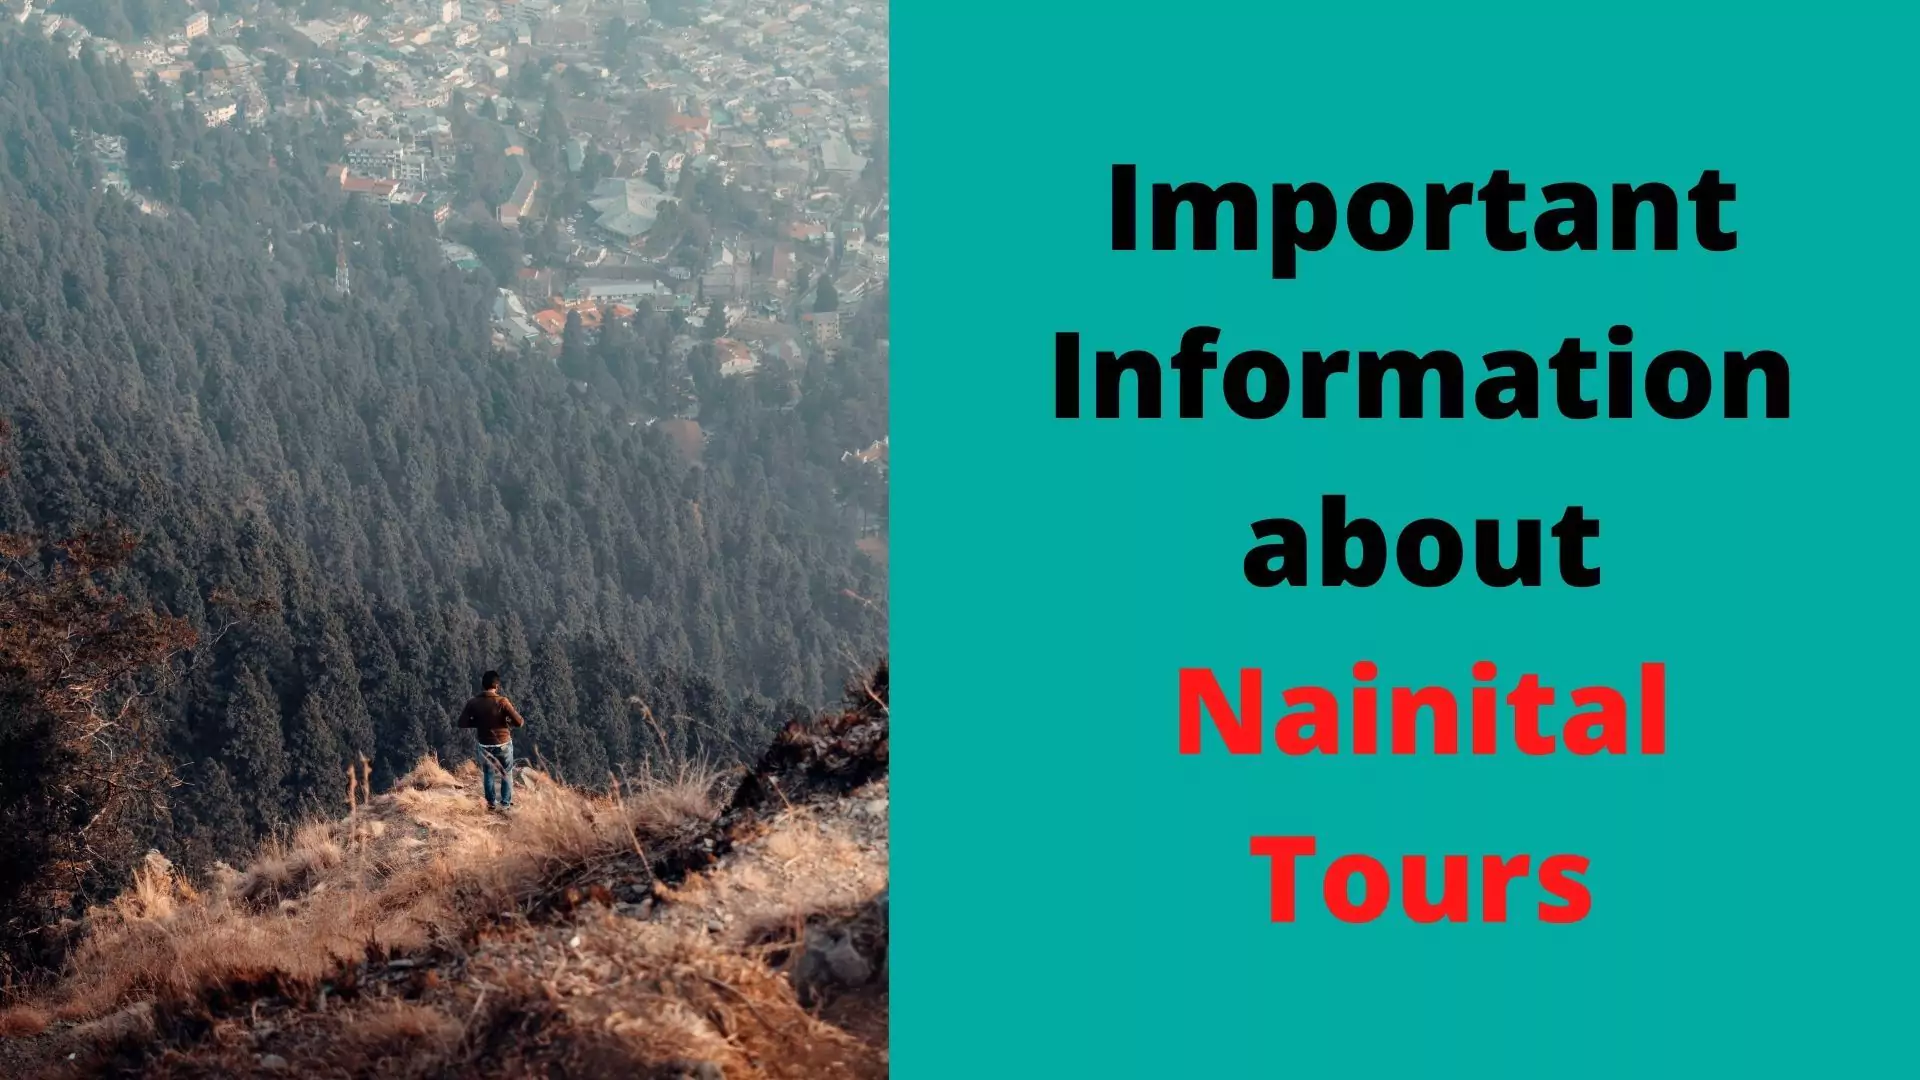 Important Information about Nainital Tours